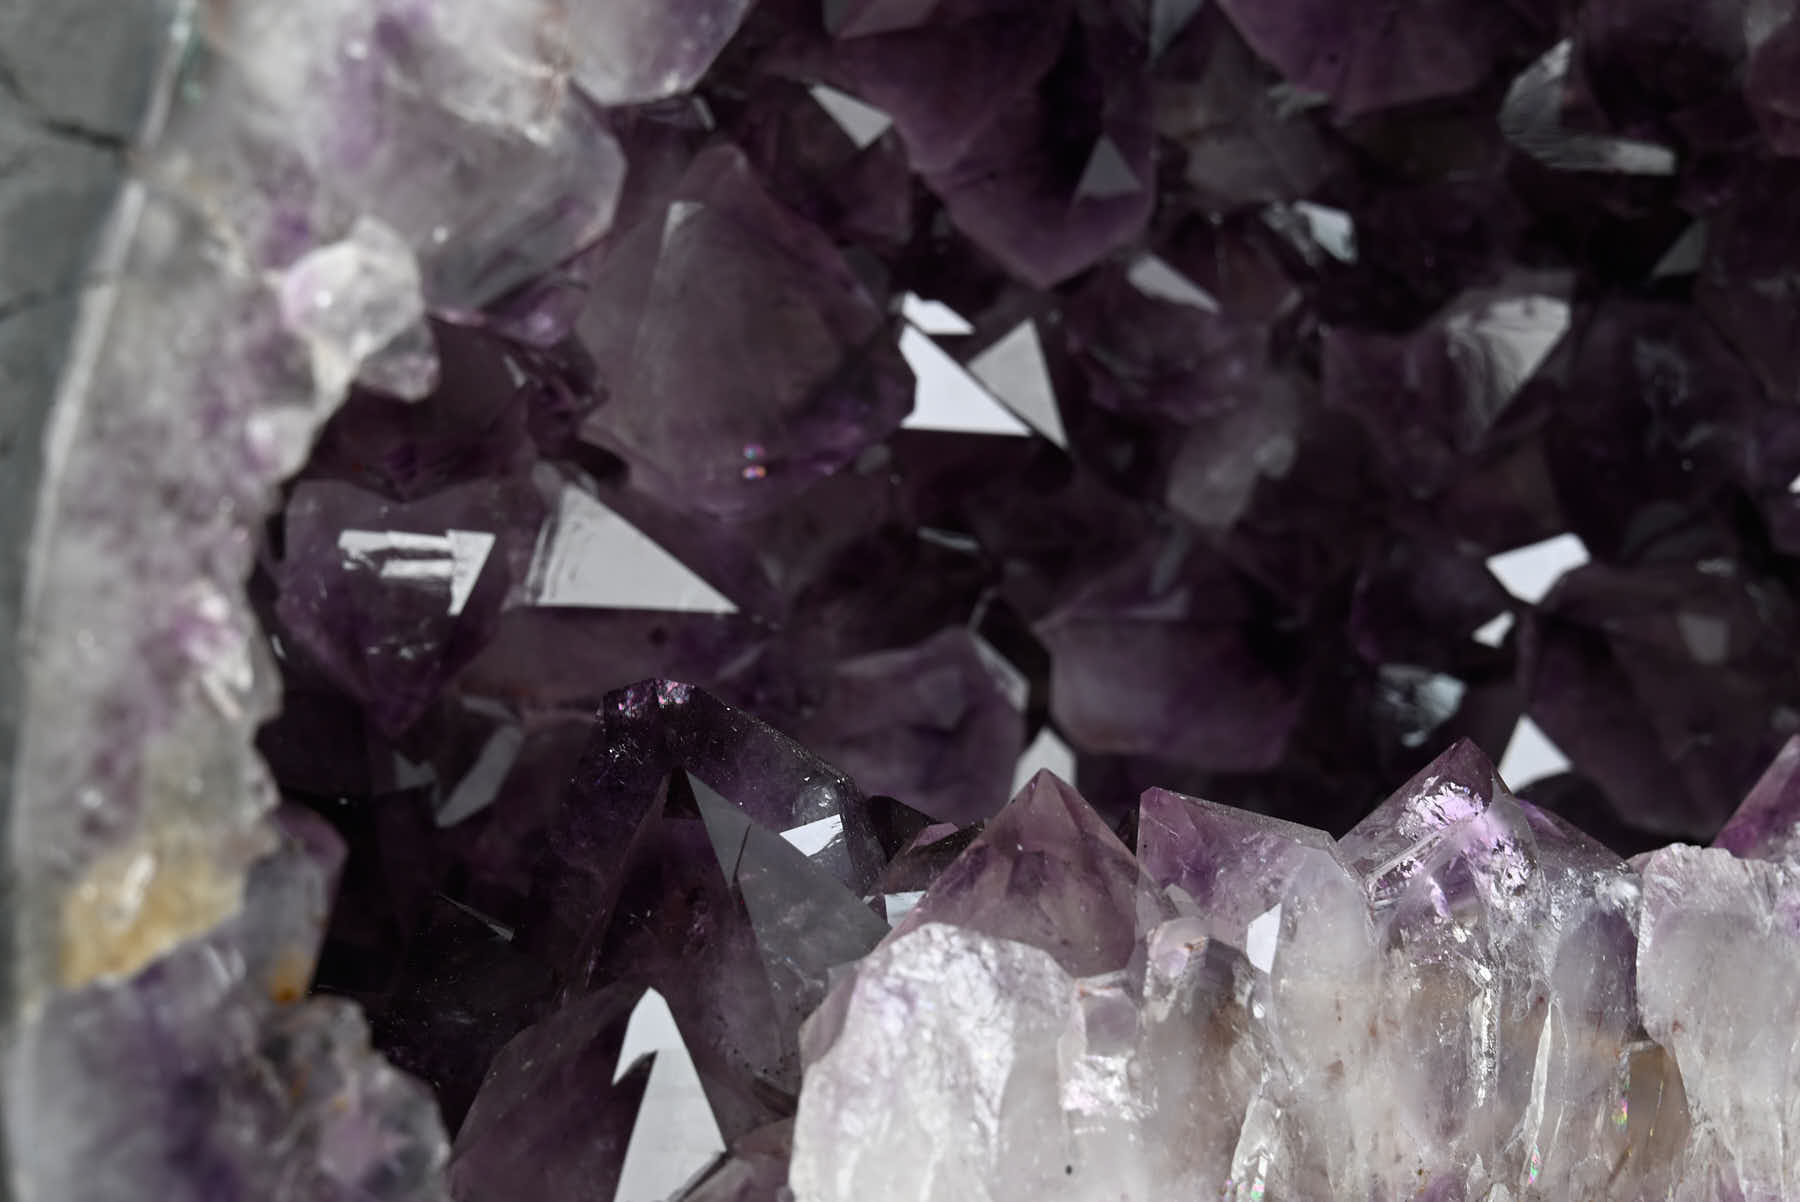 Extra Quality Amethyst Cathedral - 21.63kg, 38cm tall - #CAAMET-10063